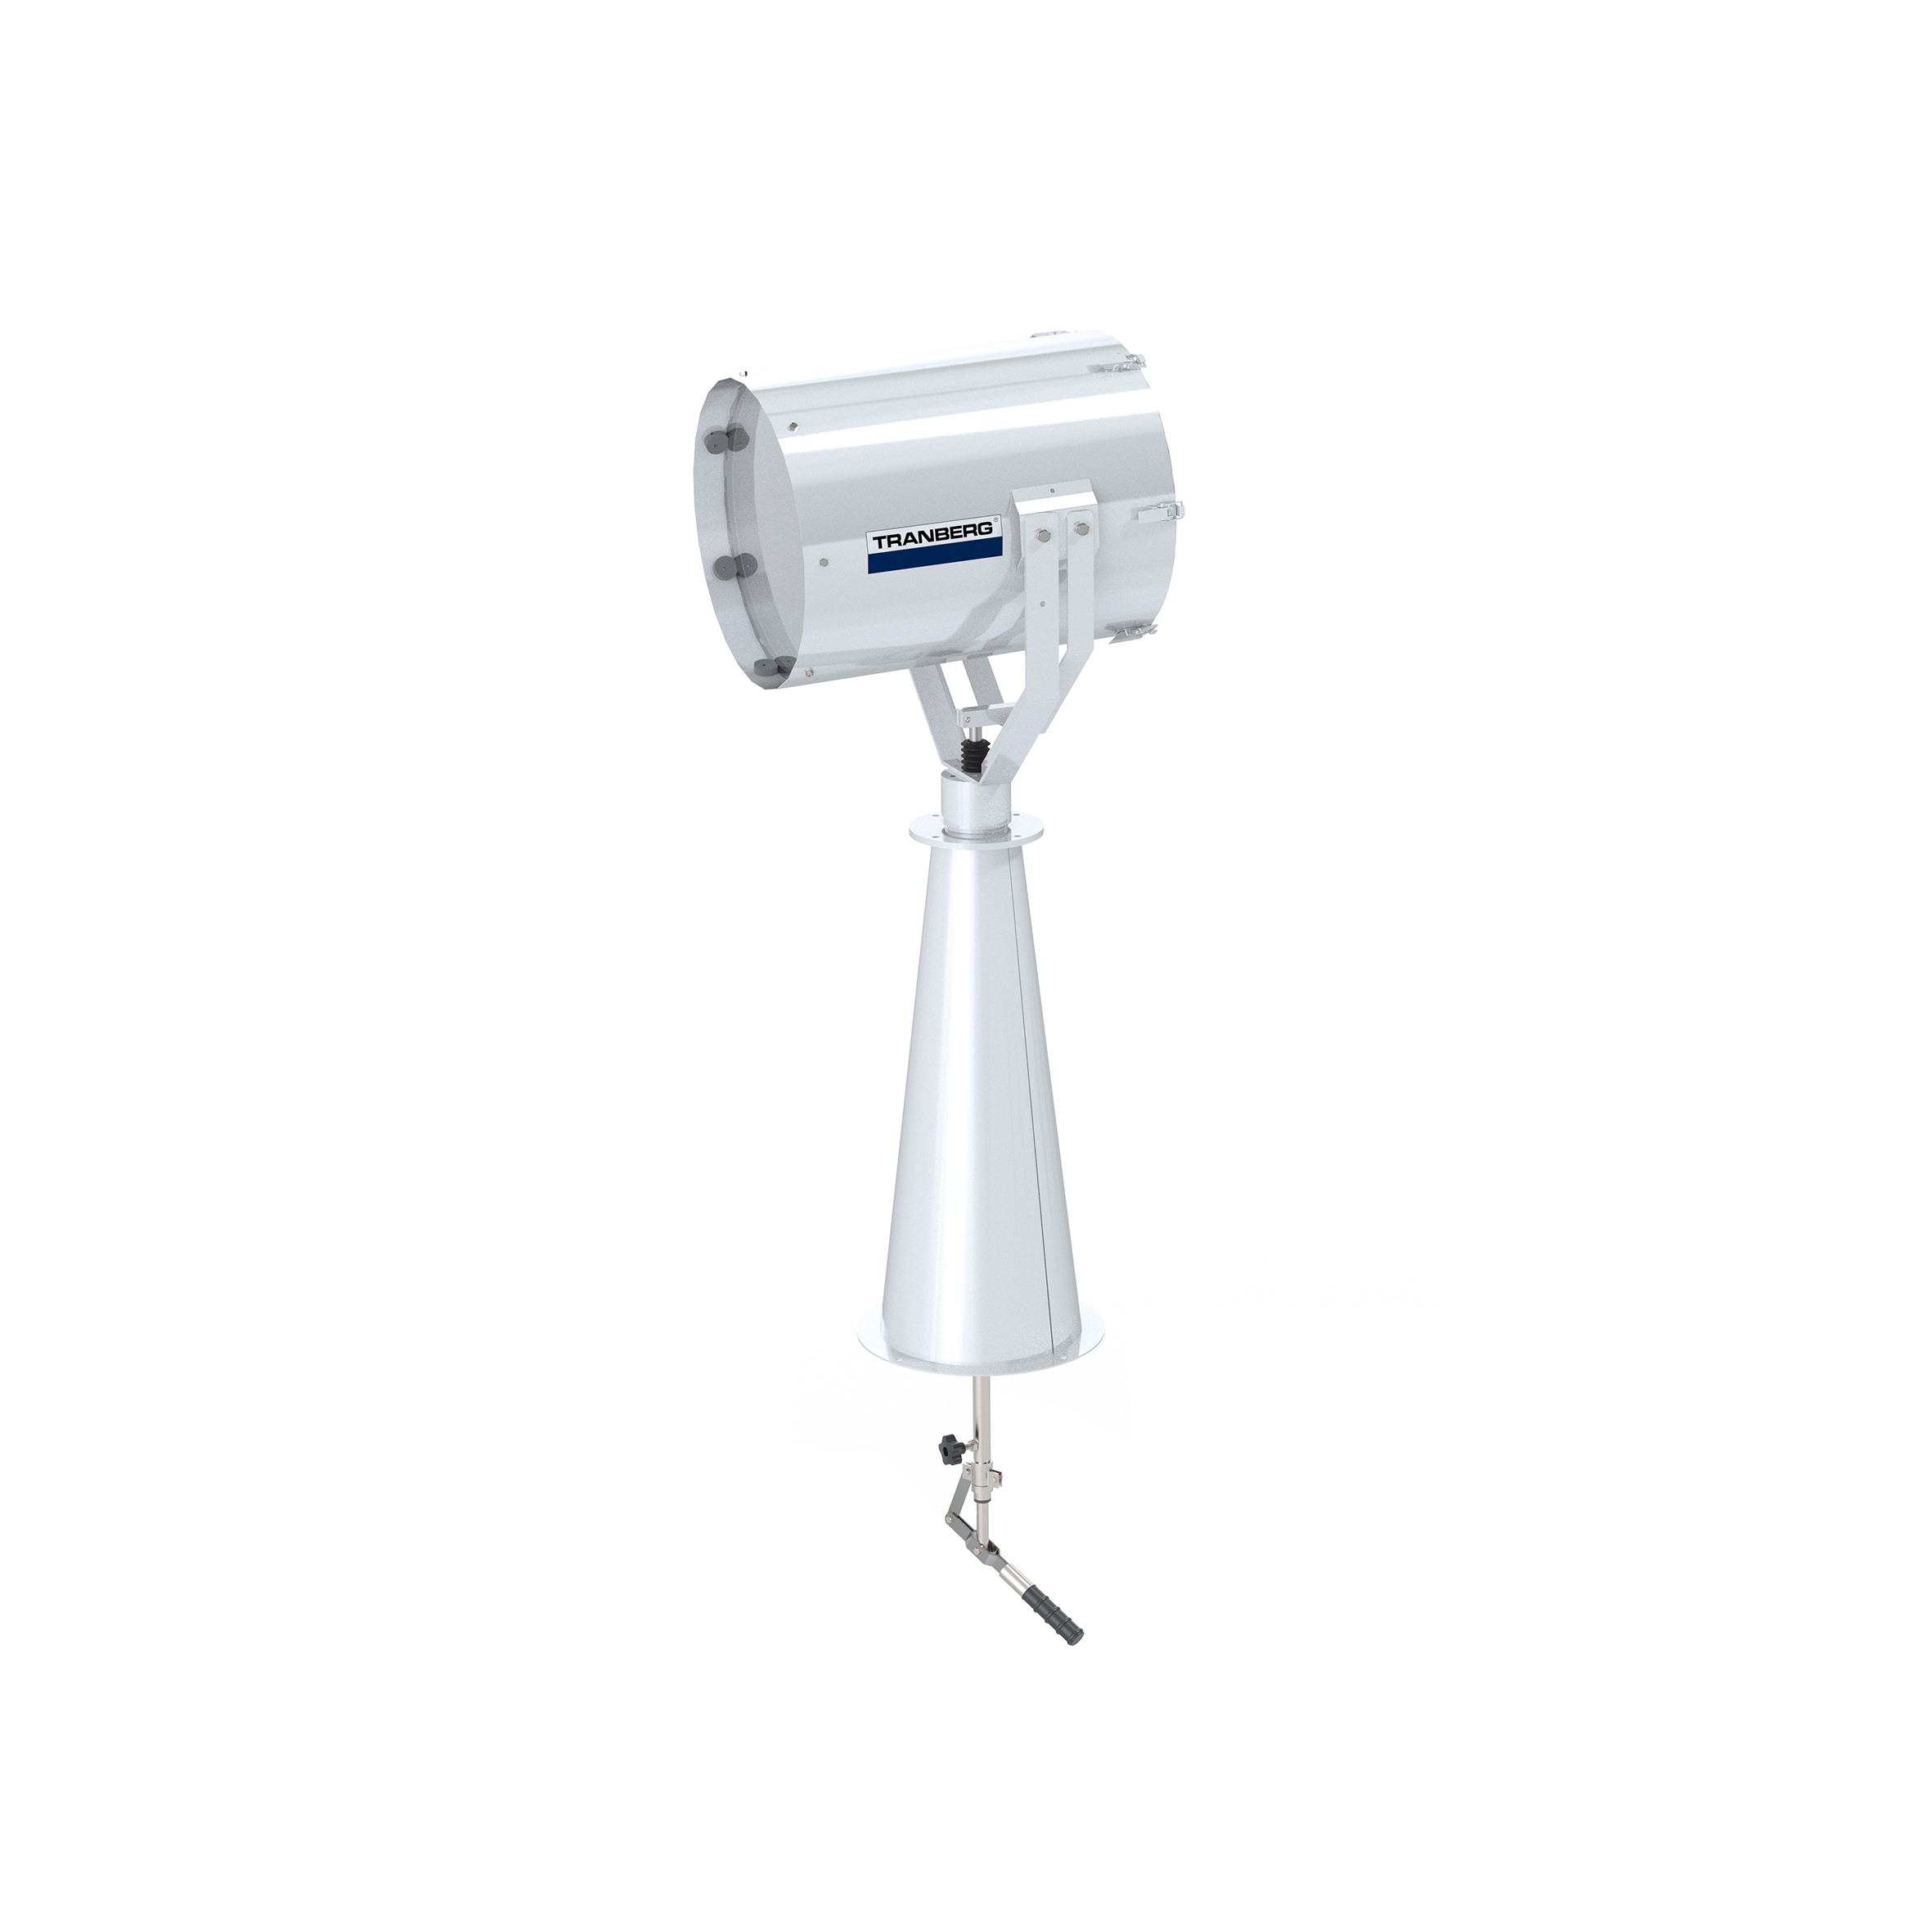 TEF 2630 Searchlight: Xenon 1600W bulb incl, 230V, Bridge Controlled, Stainless Steel, W/300 mm pede photo